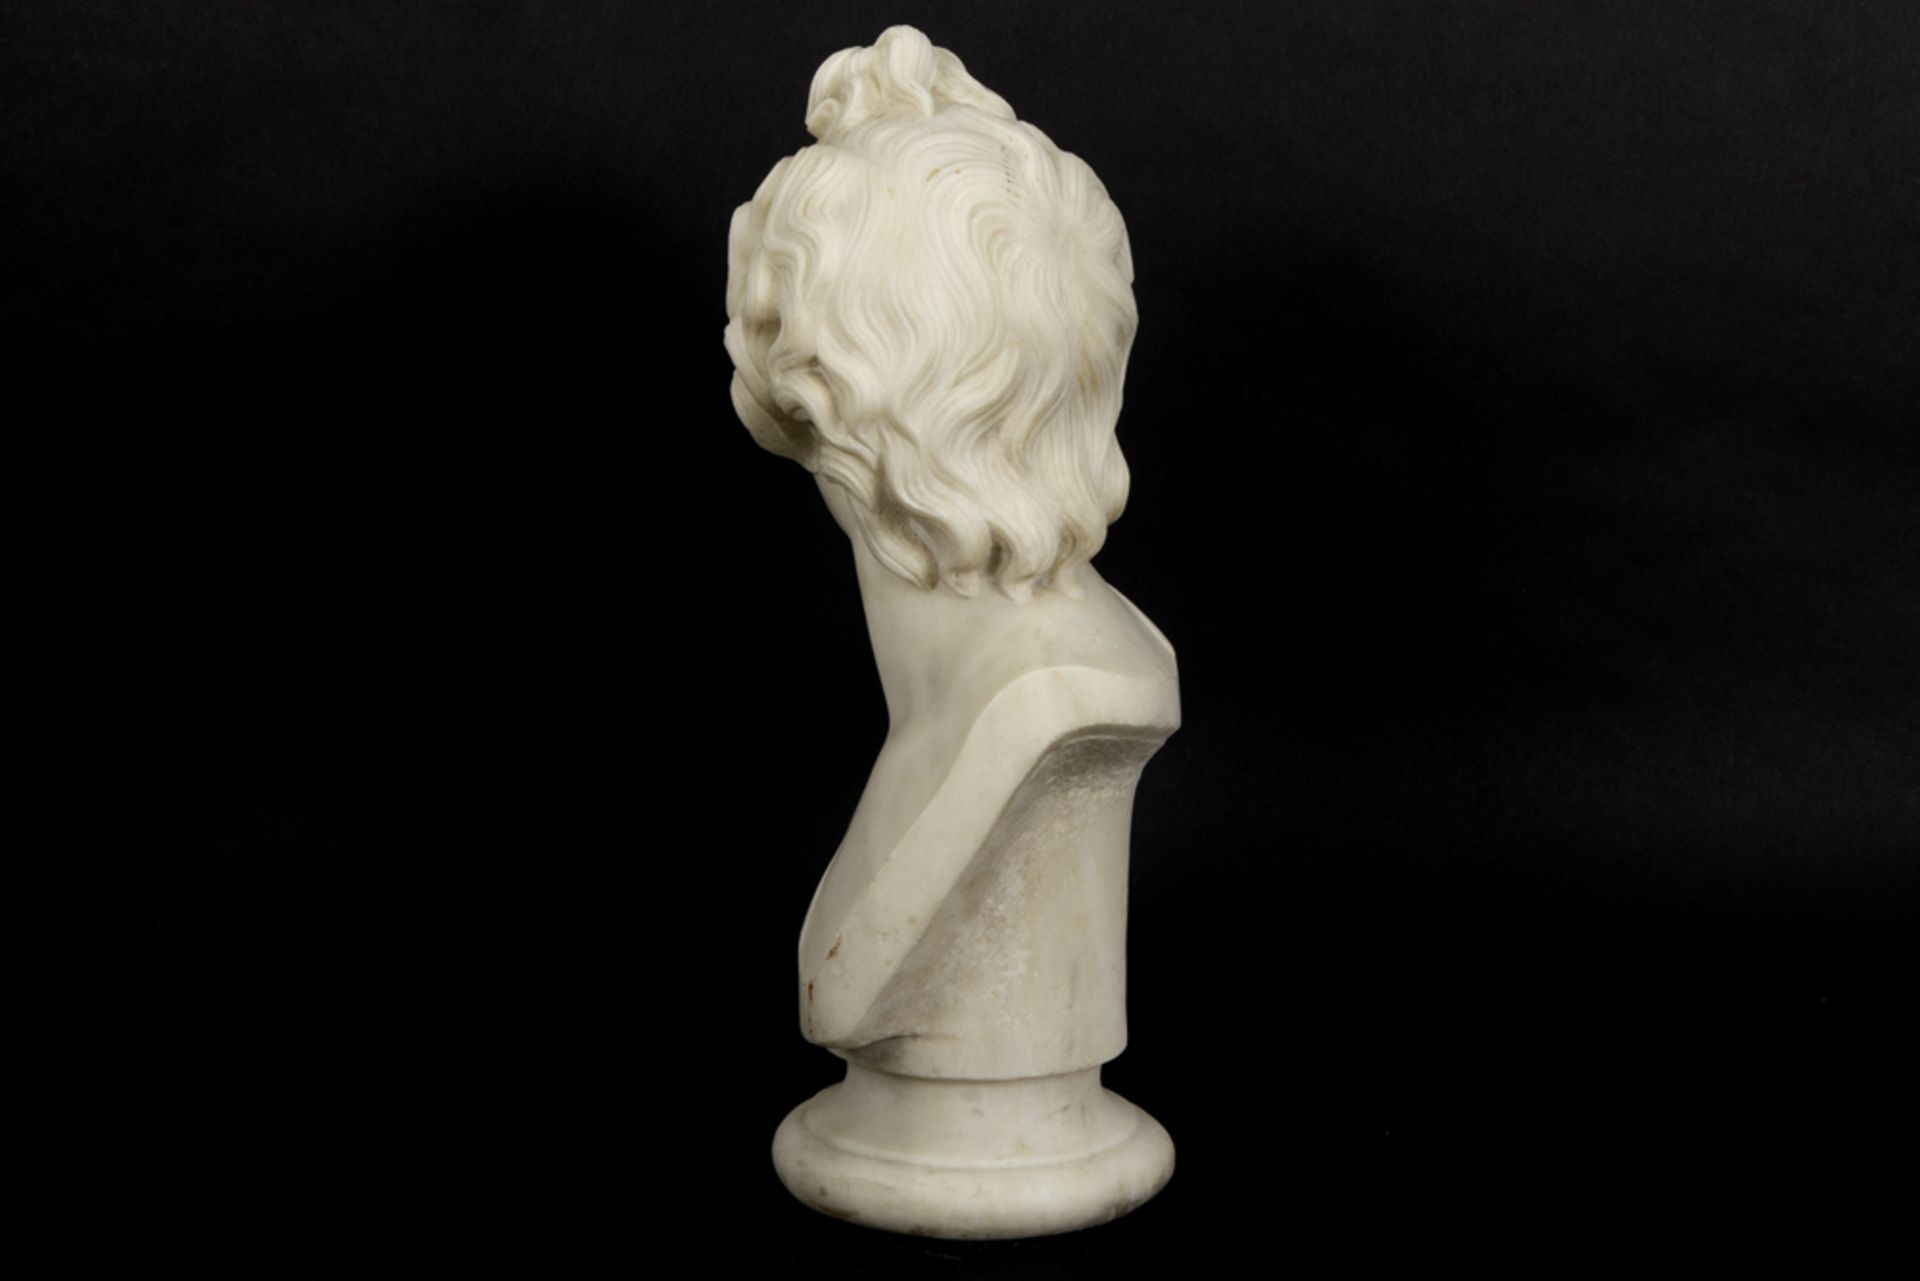 19th Cent. Ioannis Kossos signed "Bust of a Greek Adonis" sculpture in Carrara marble - signed in - Image 3 of 7